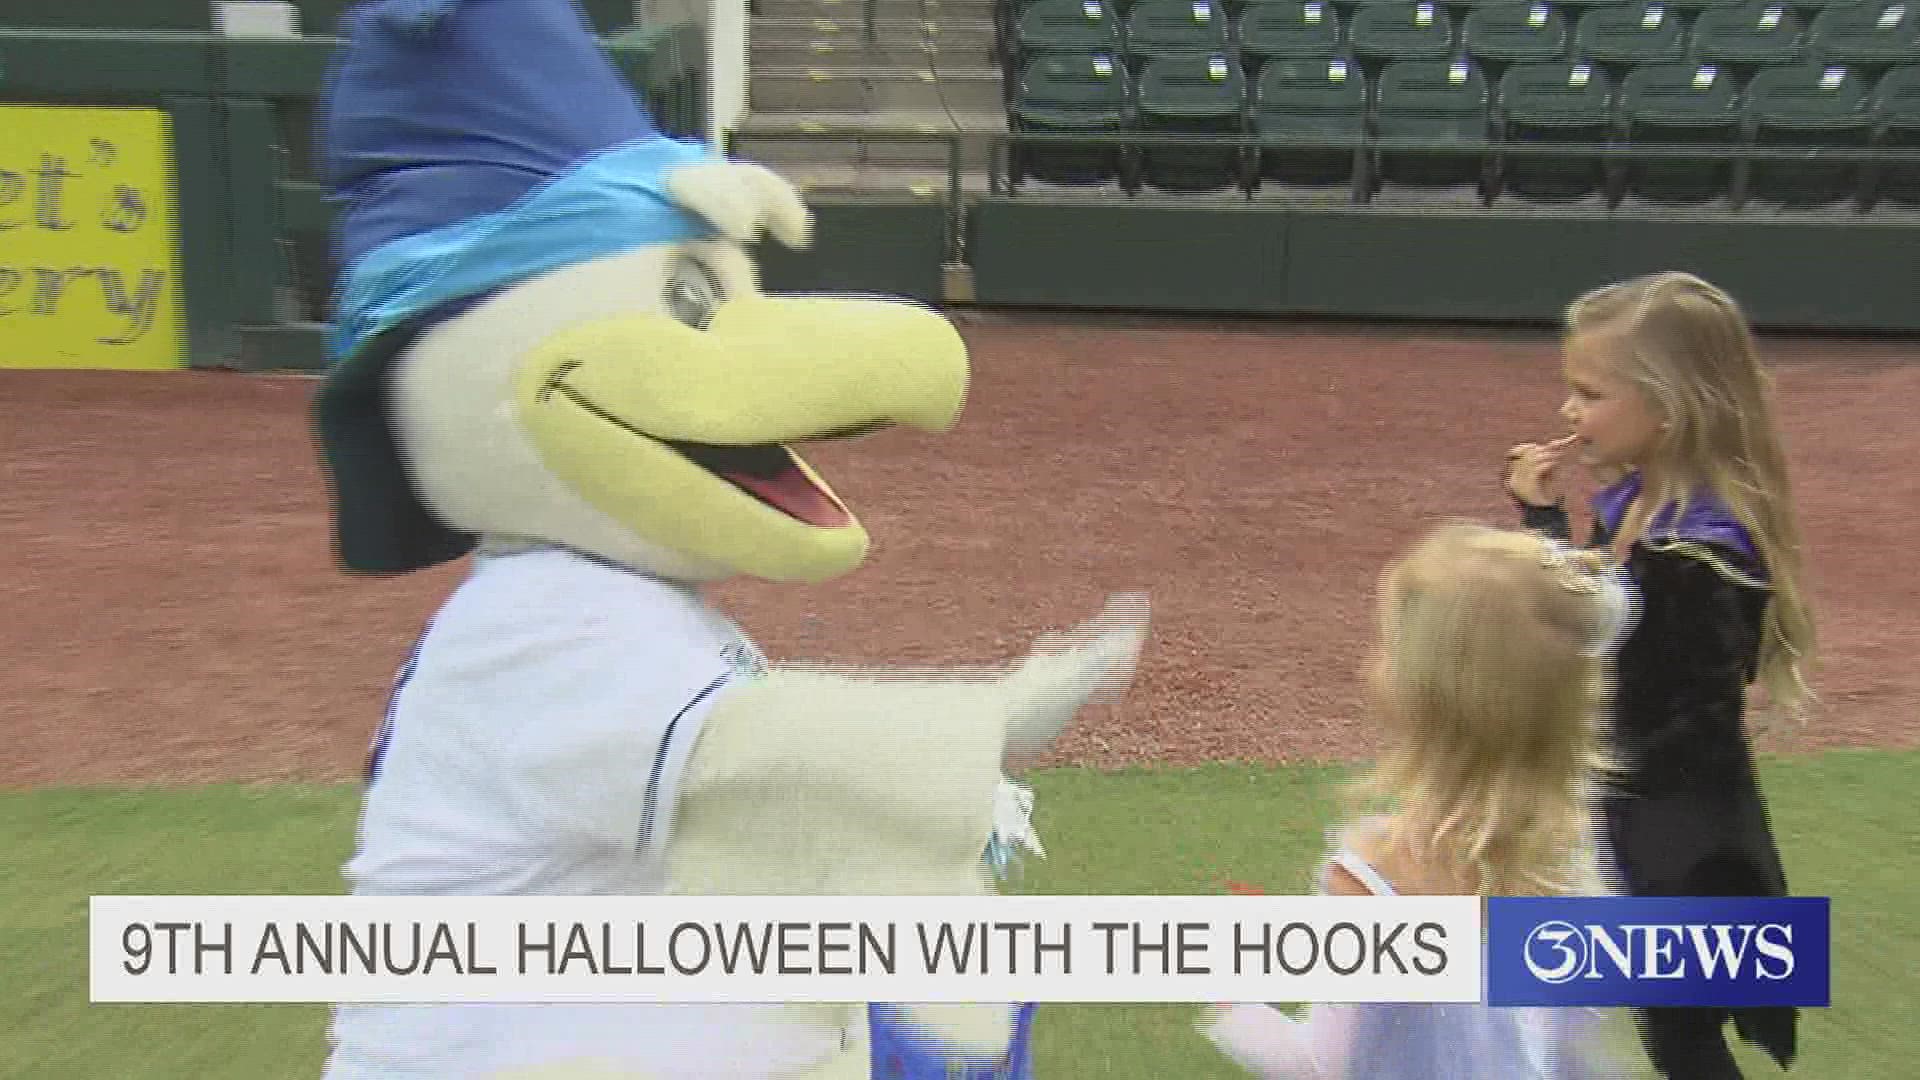 Halloween with the Hooks' held at Whataburger Field